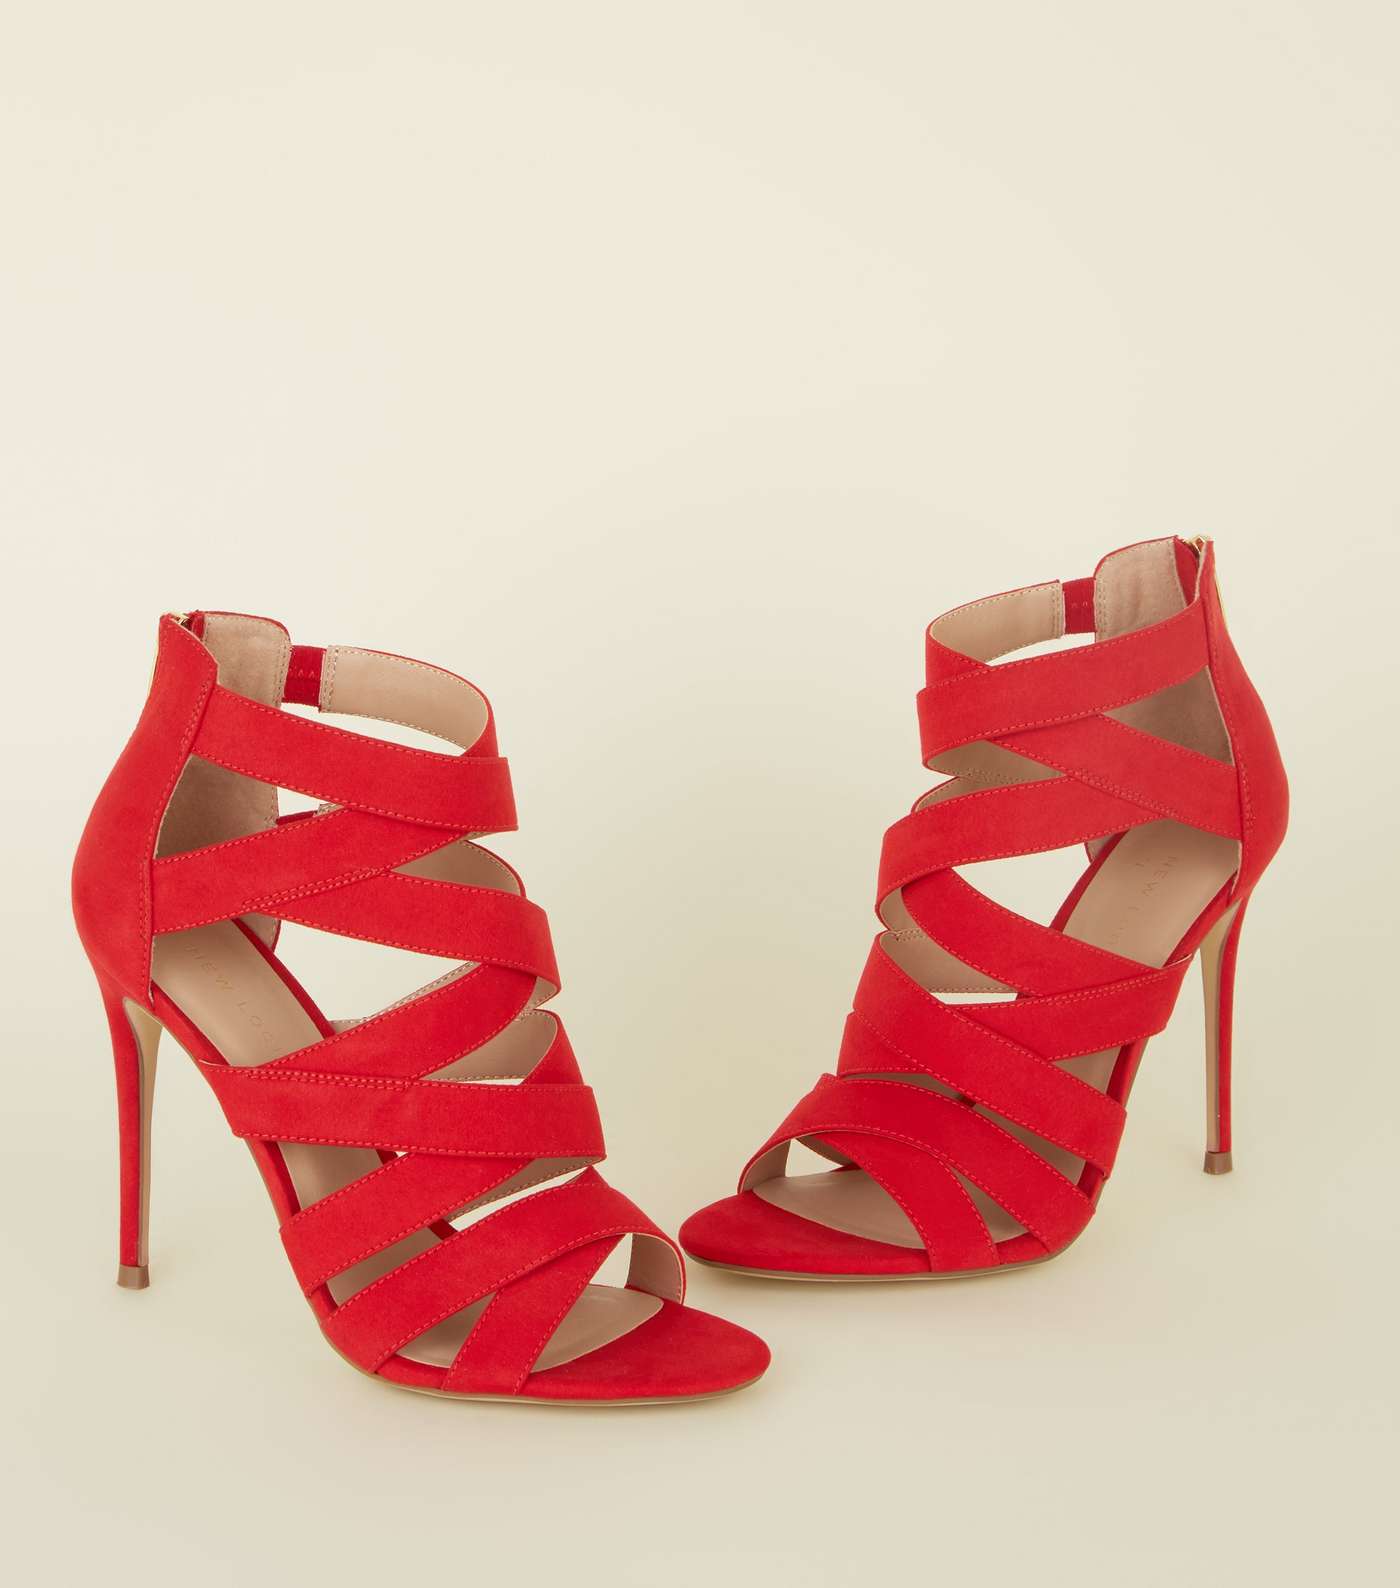 Red Strappy Suedette Stiletto Heel Shoes Image 3